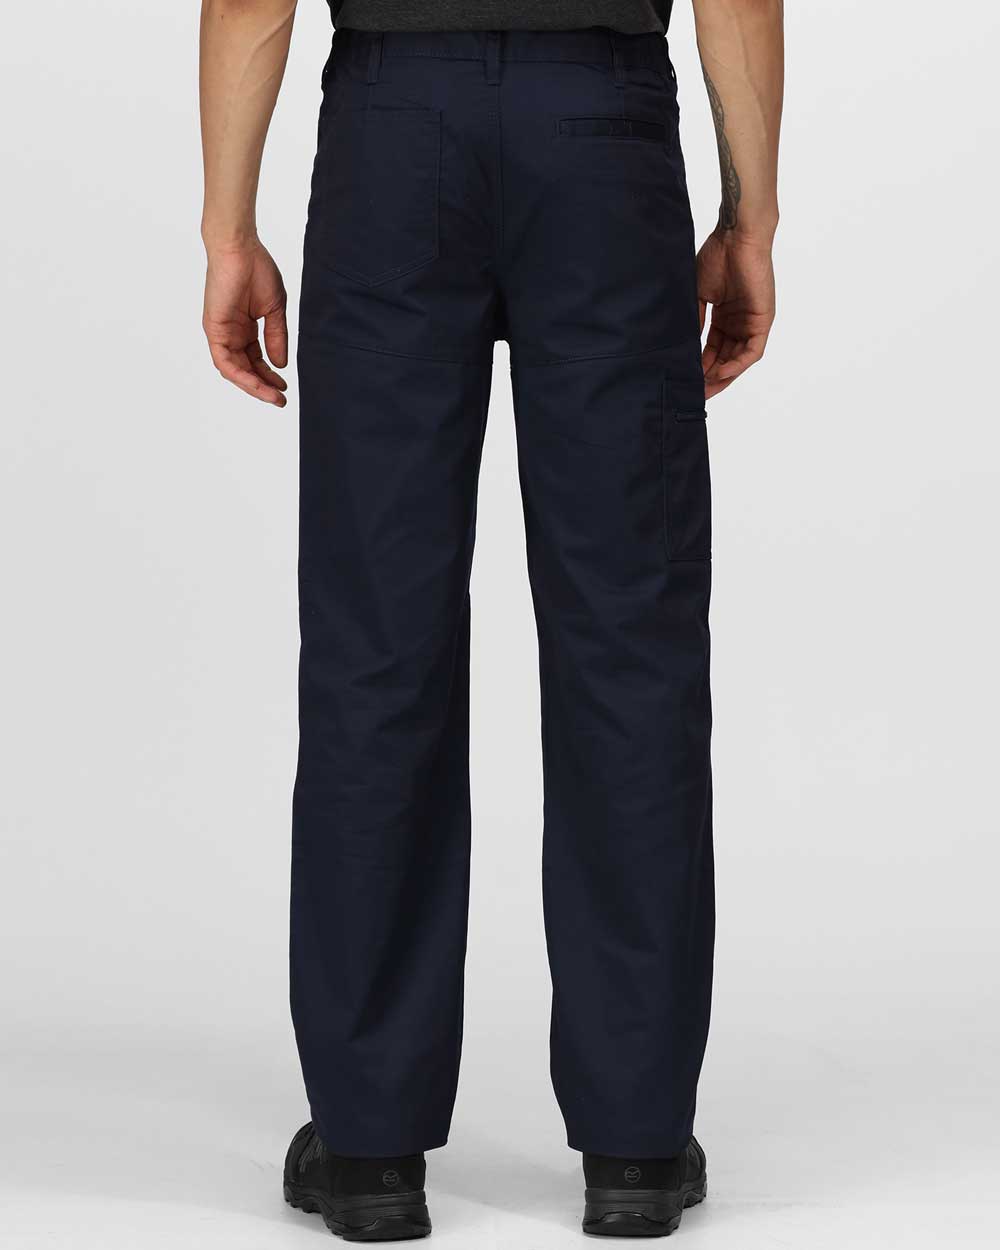 Work Trousers Regatta Pro Action Trousers in Navy 